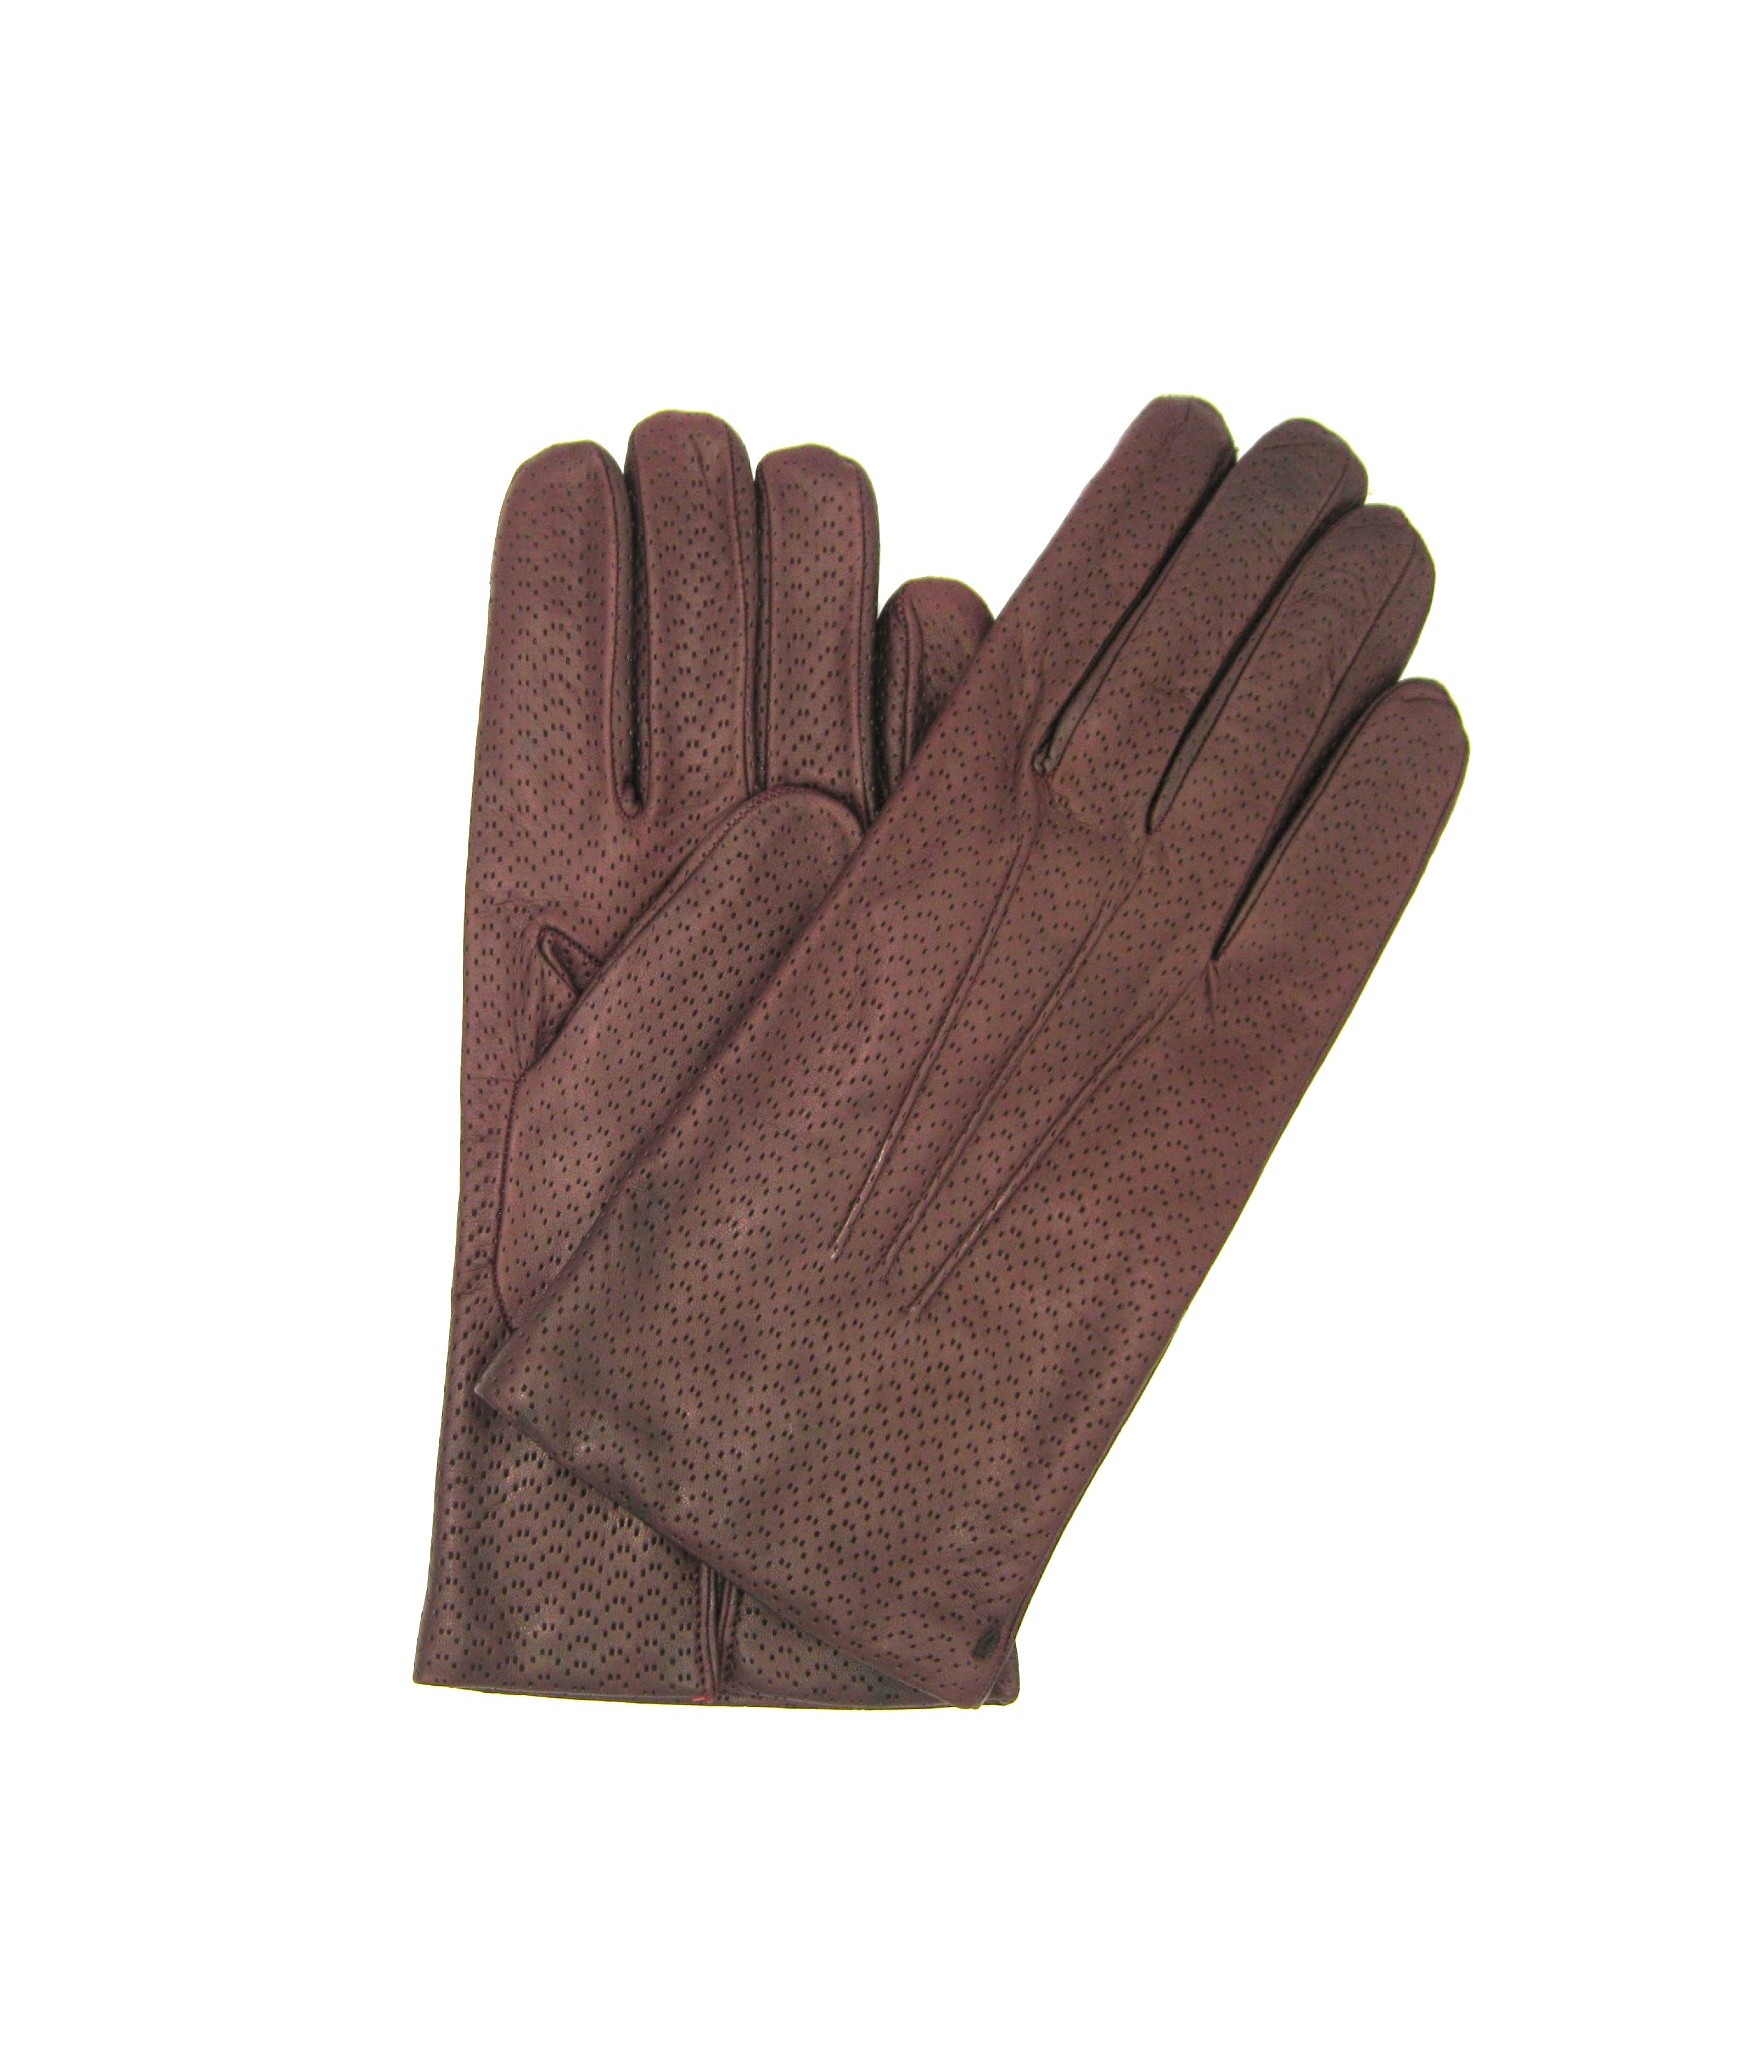 Uomo Easy Going Nappa leather gloves 2bt ,cashmere lined